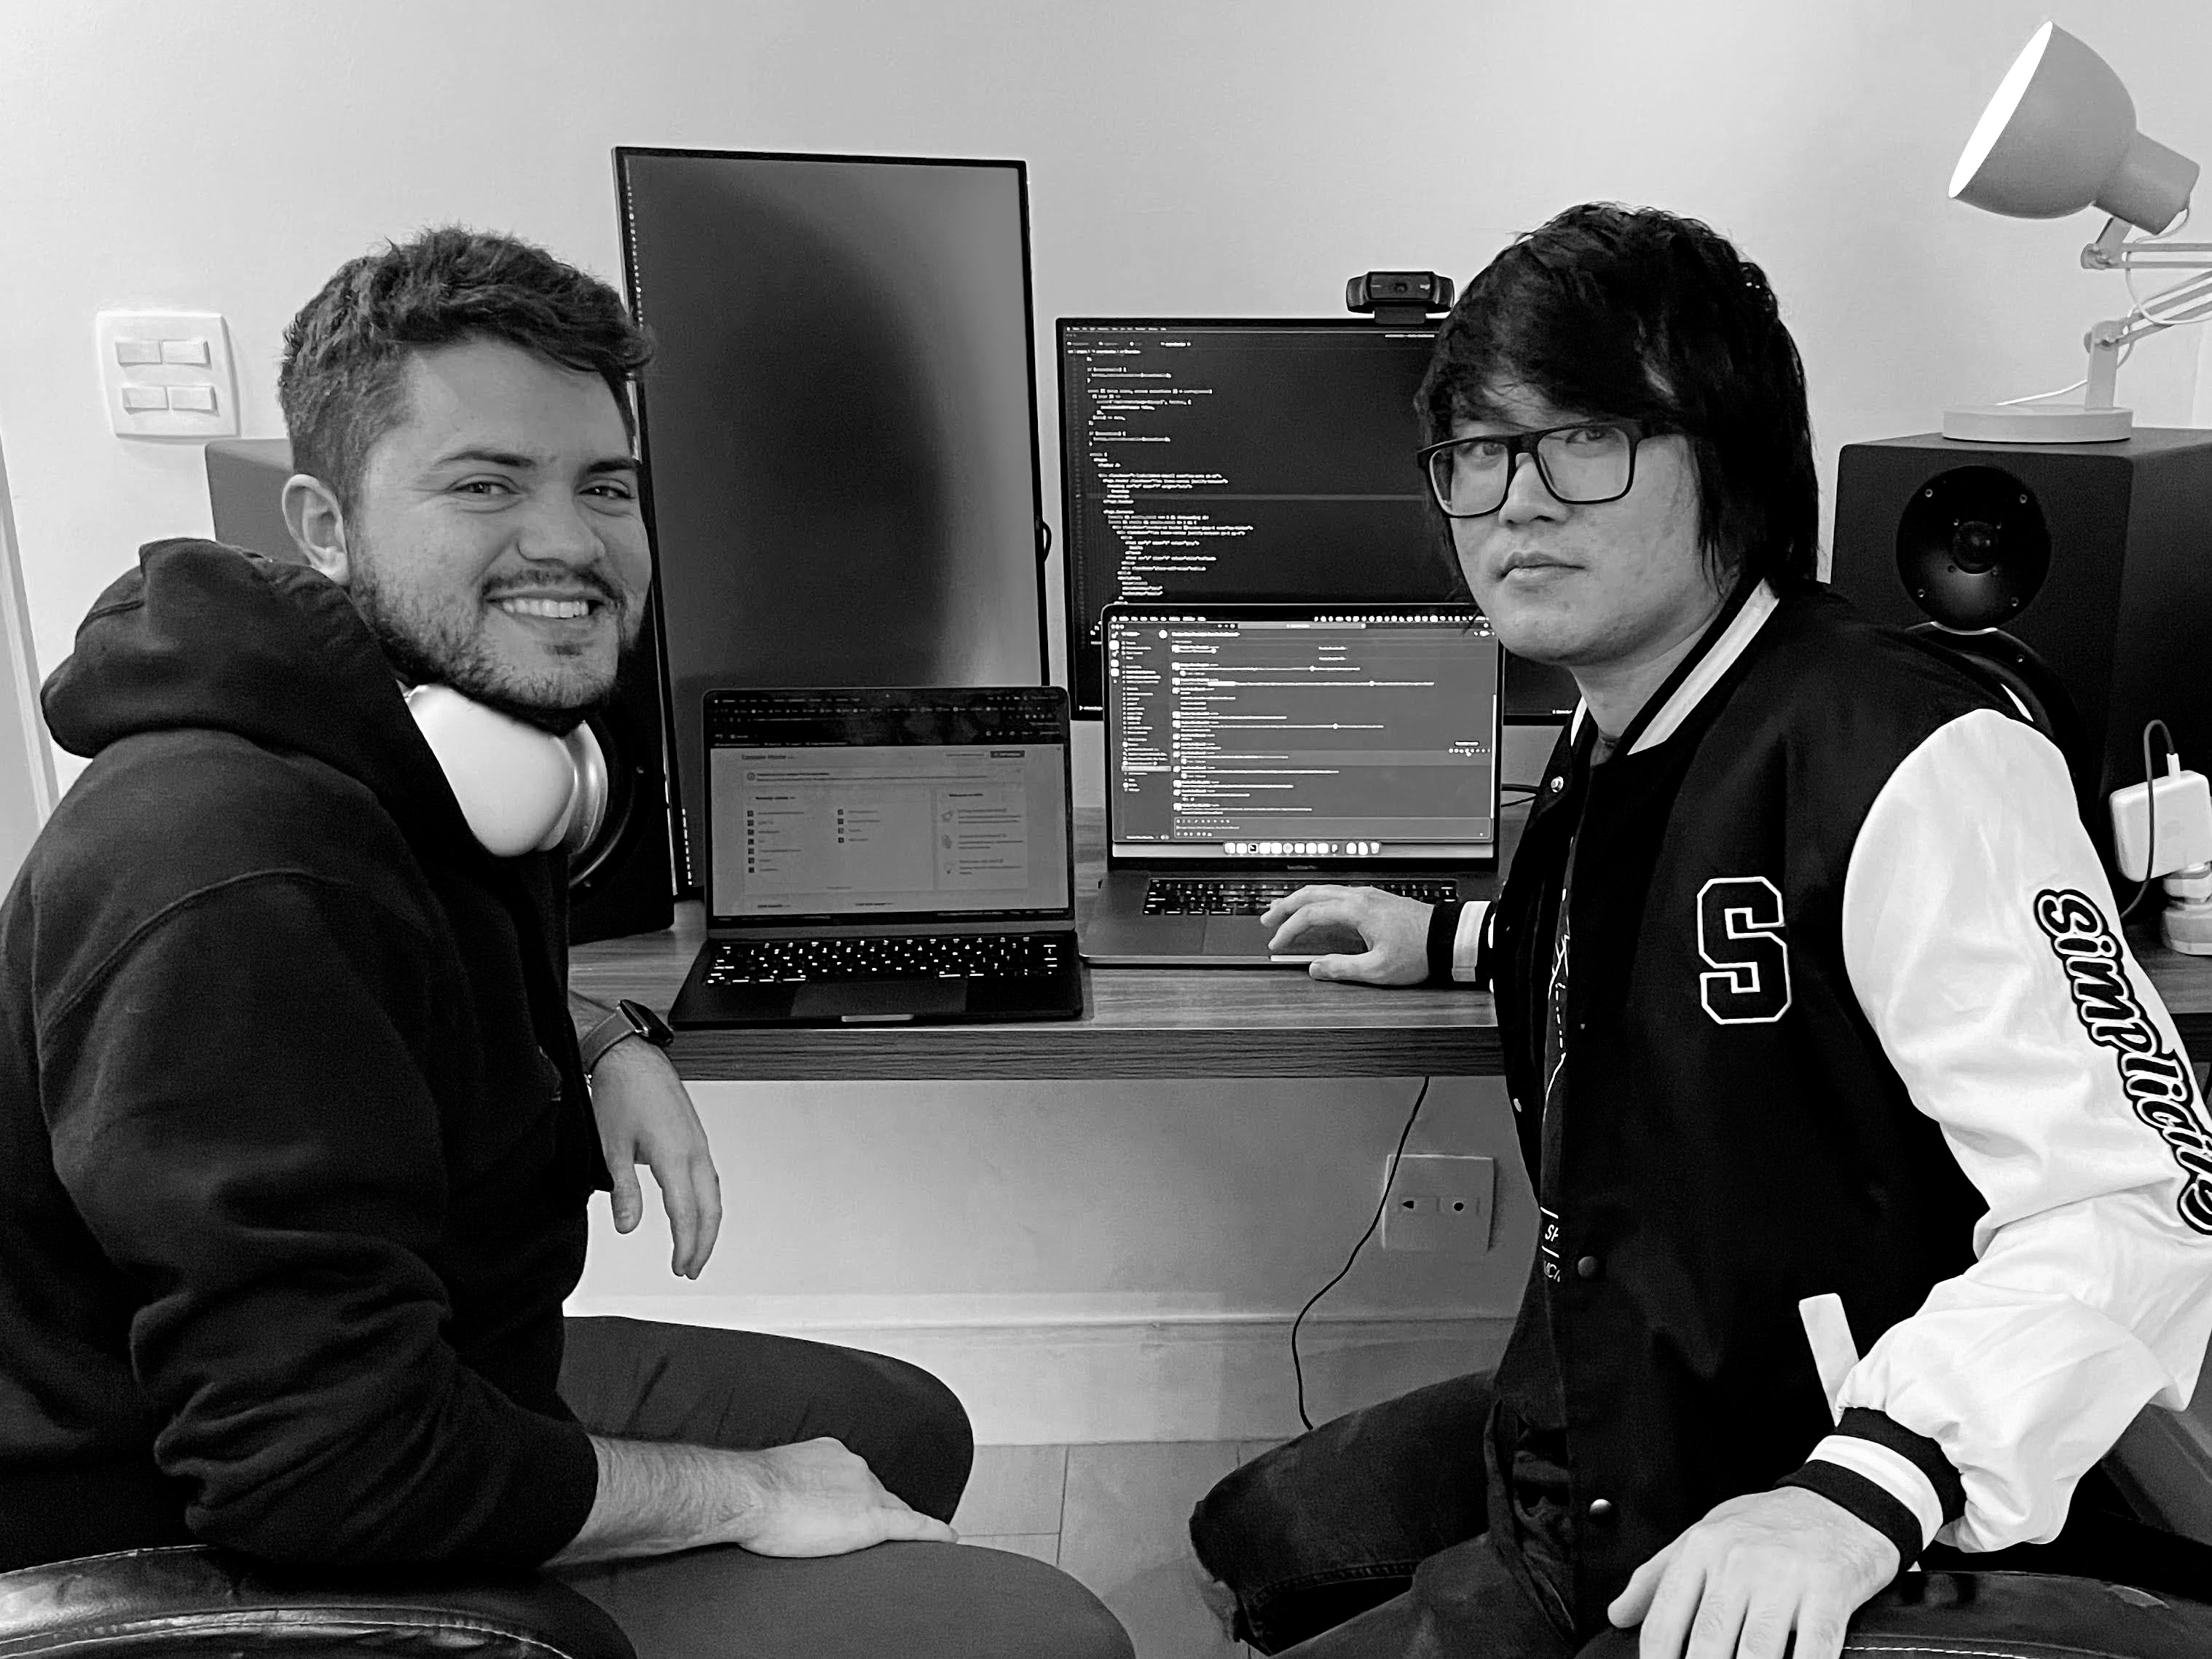 Zeno Rocha (left) and Bu Kinoshita (right) writing the first lines of code for Resend